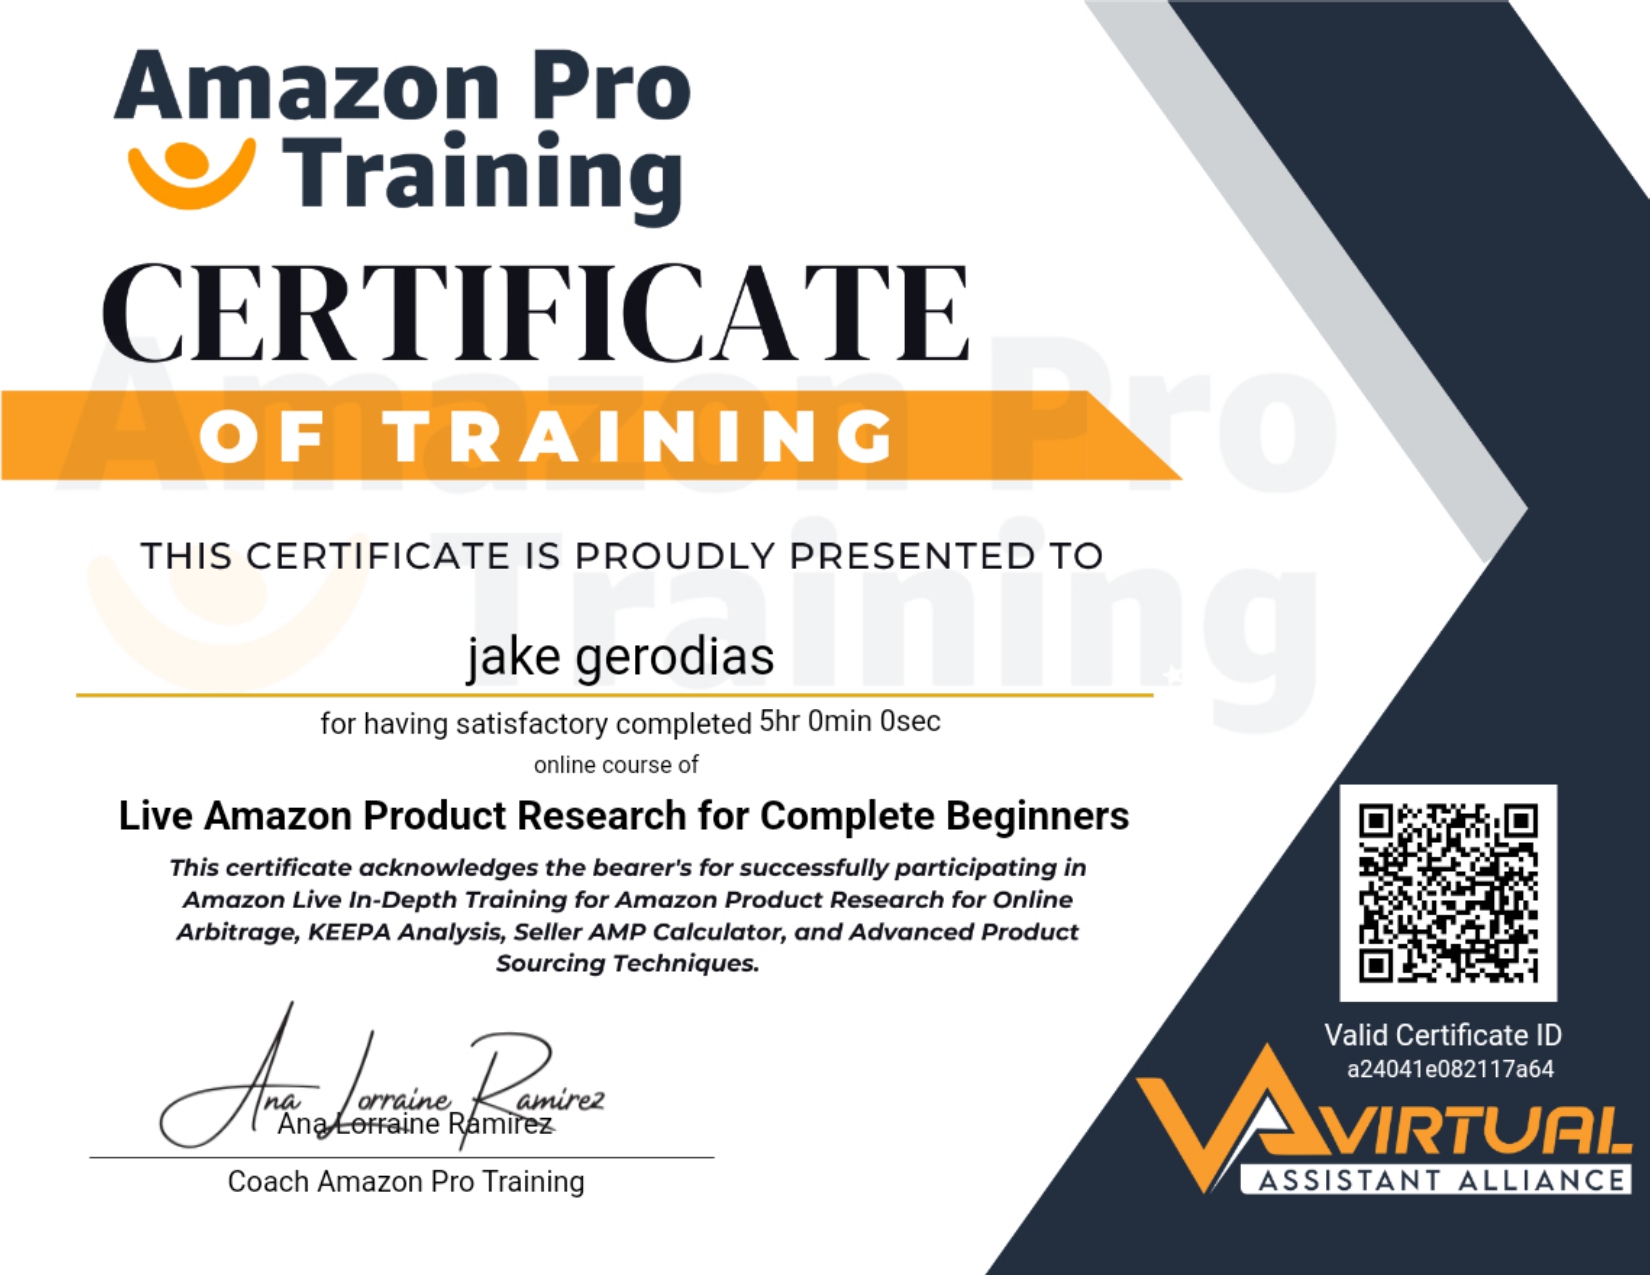 VAA - Amazon Product Research